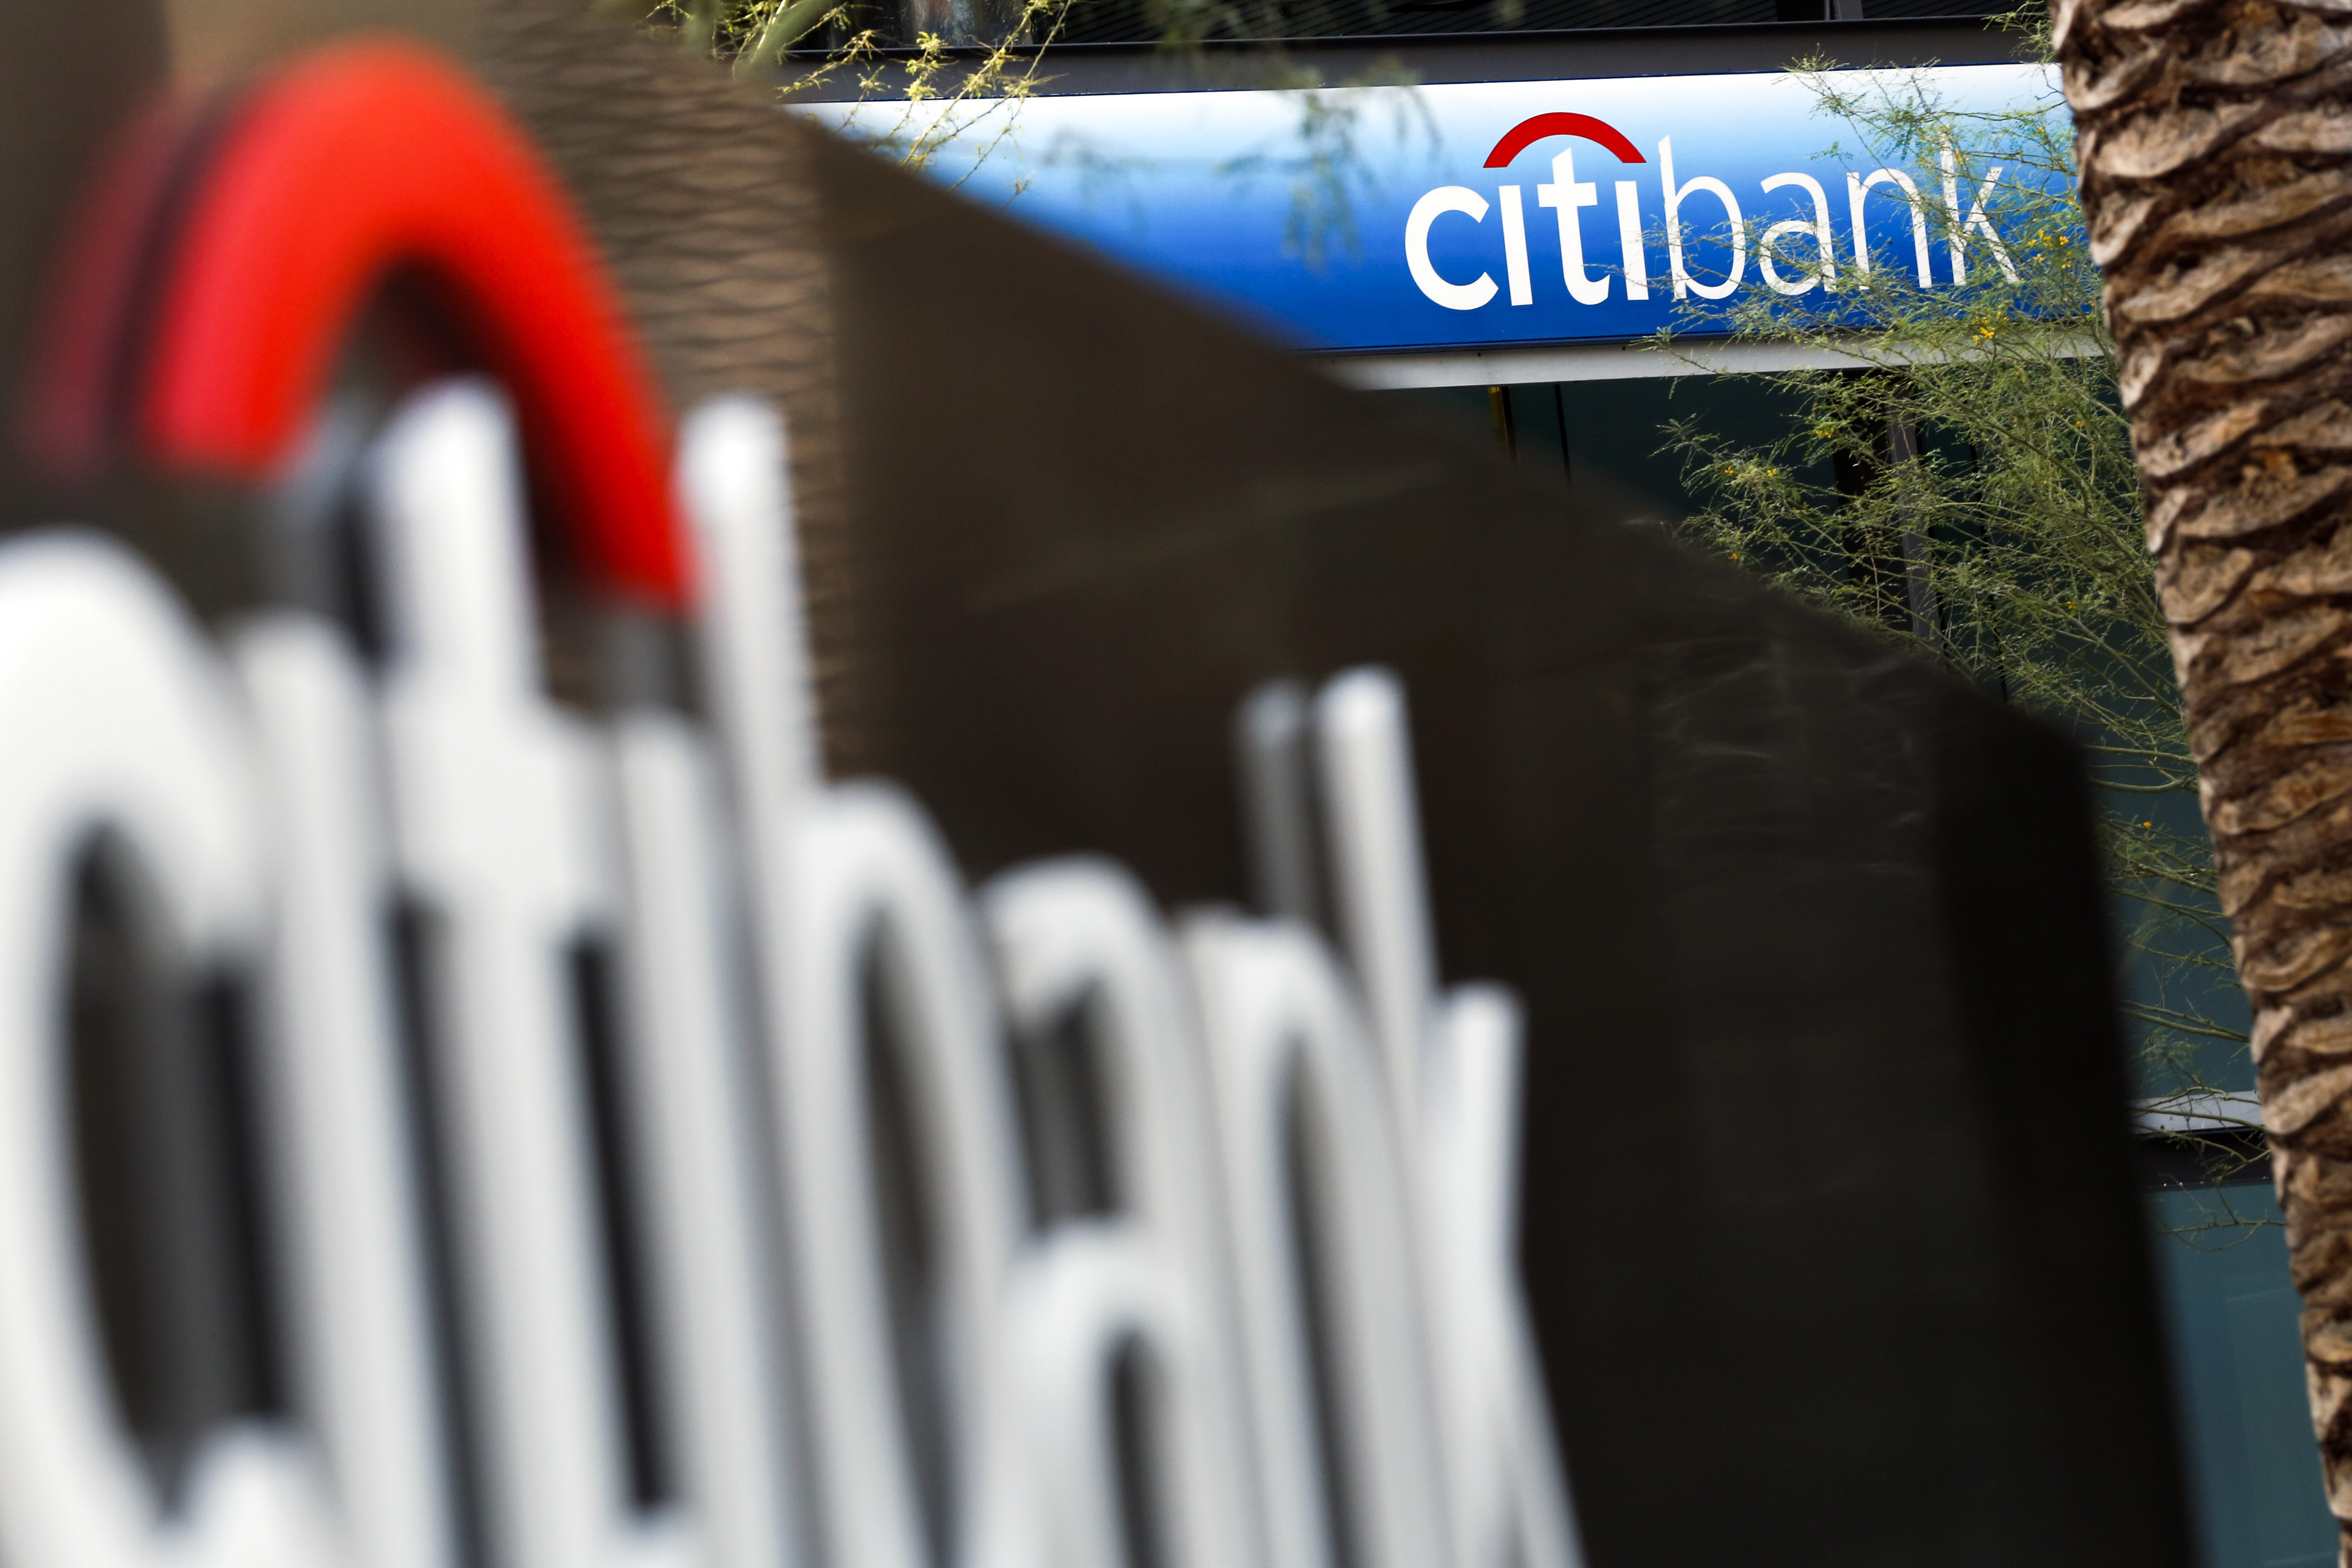 Citibank Must Pay $700 Million to Consumers for Illegal Credit Card Practices